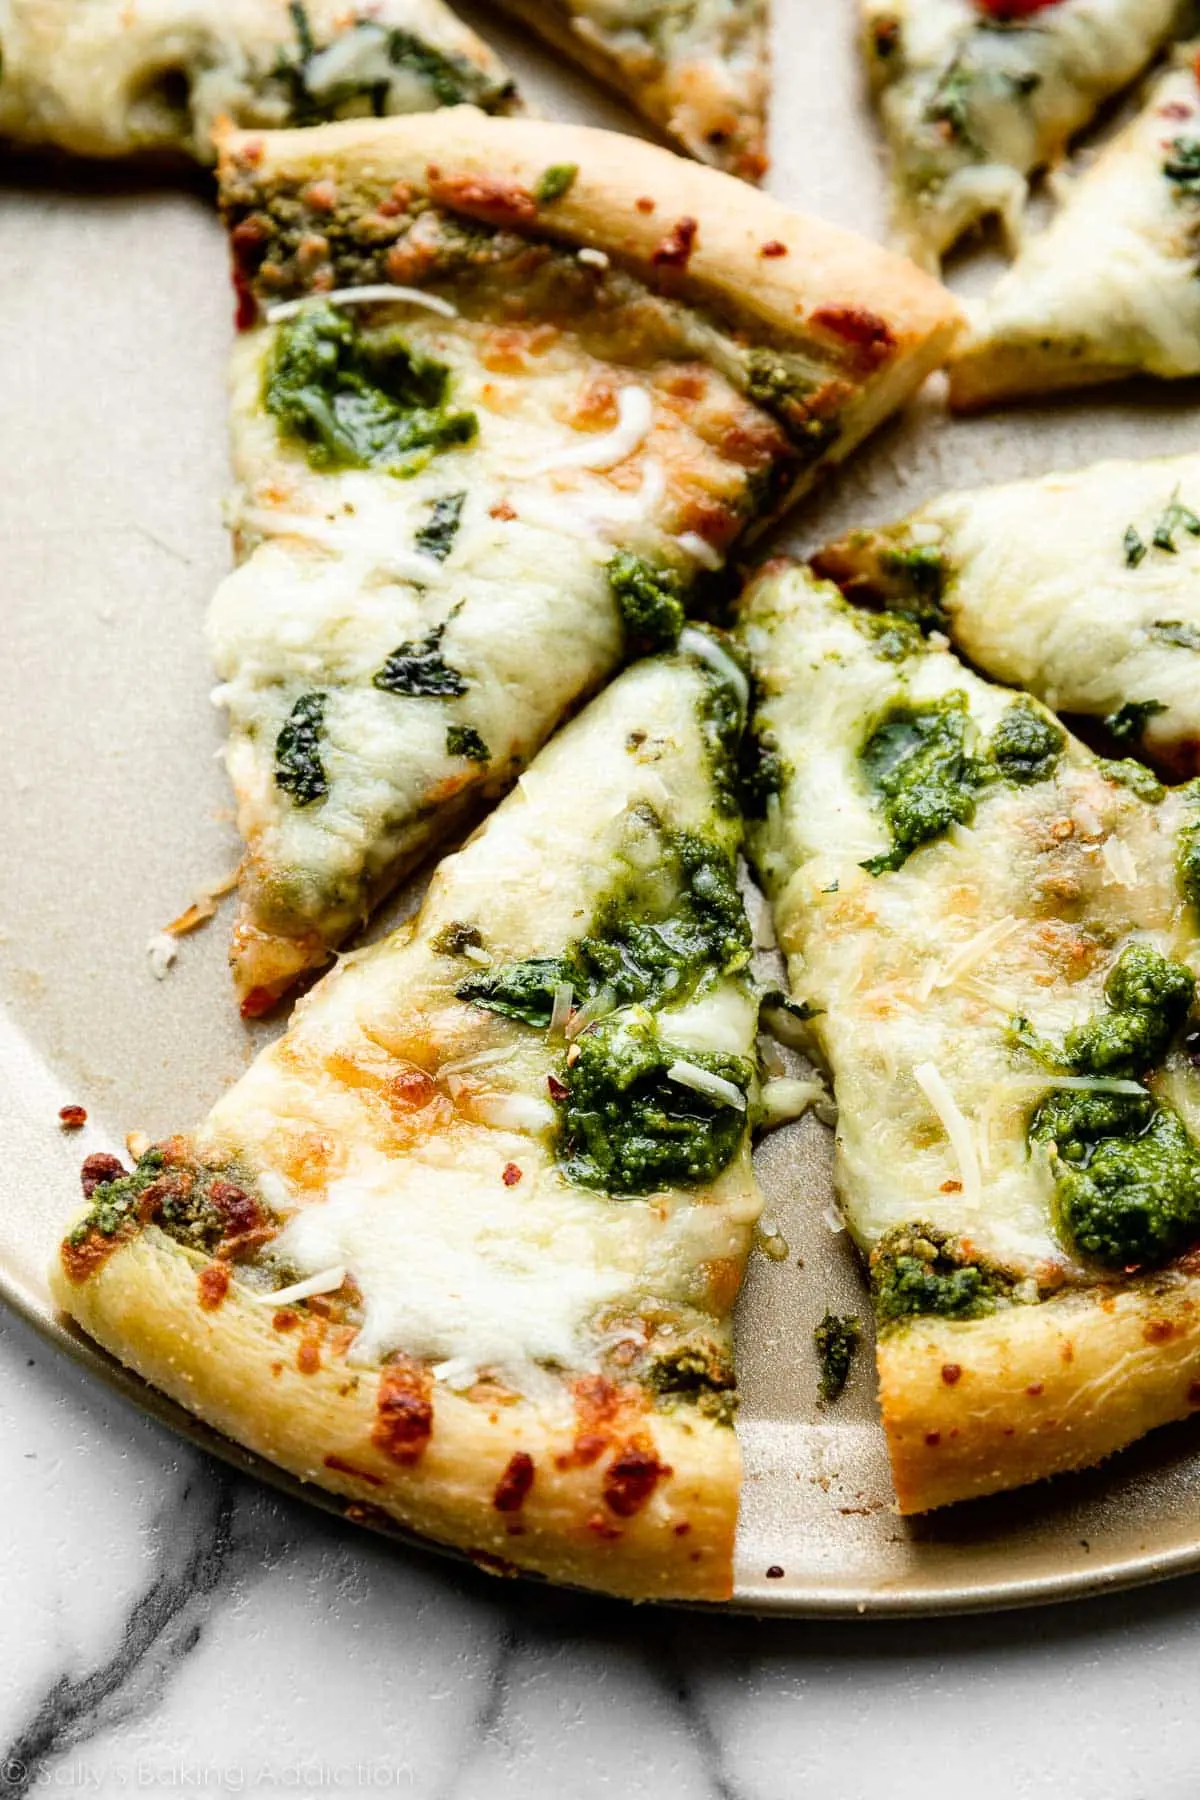 pizza with pesto sauce - What is the name of the Italian pizza with pesto